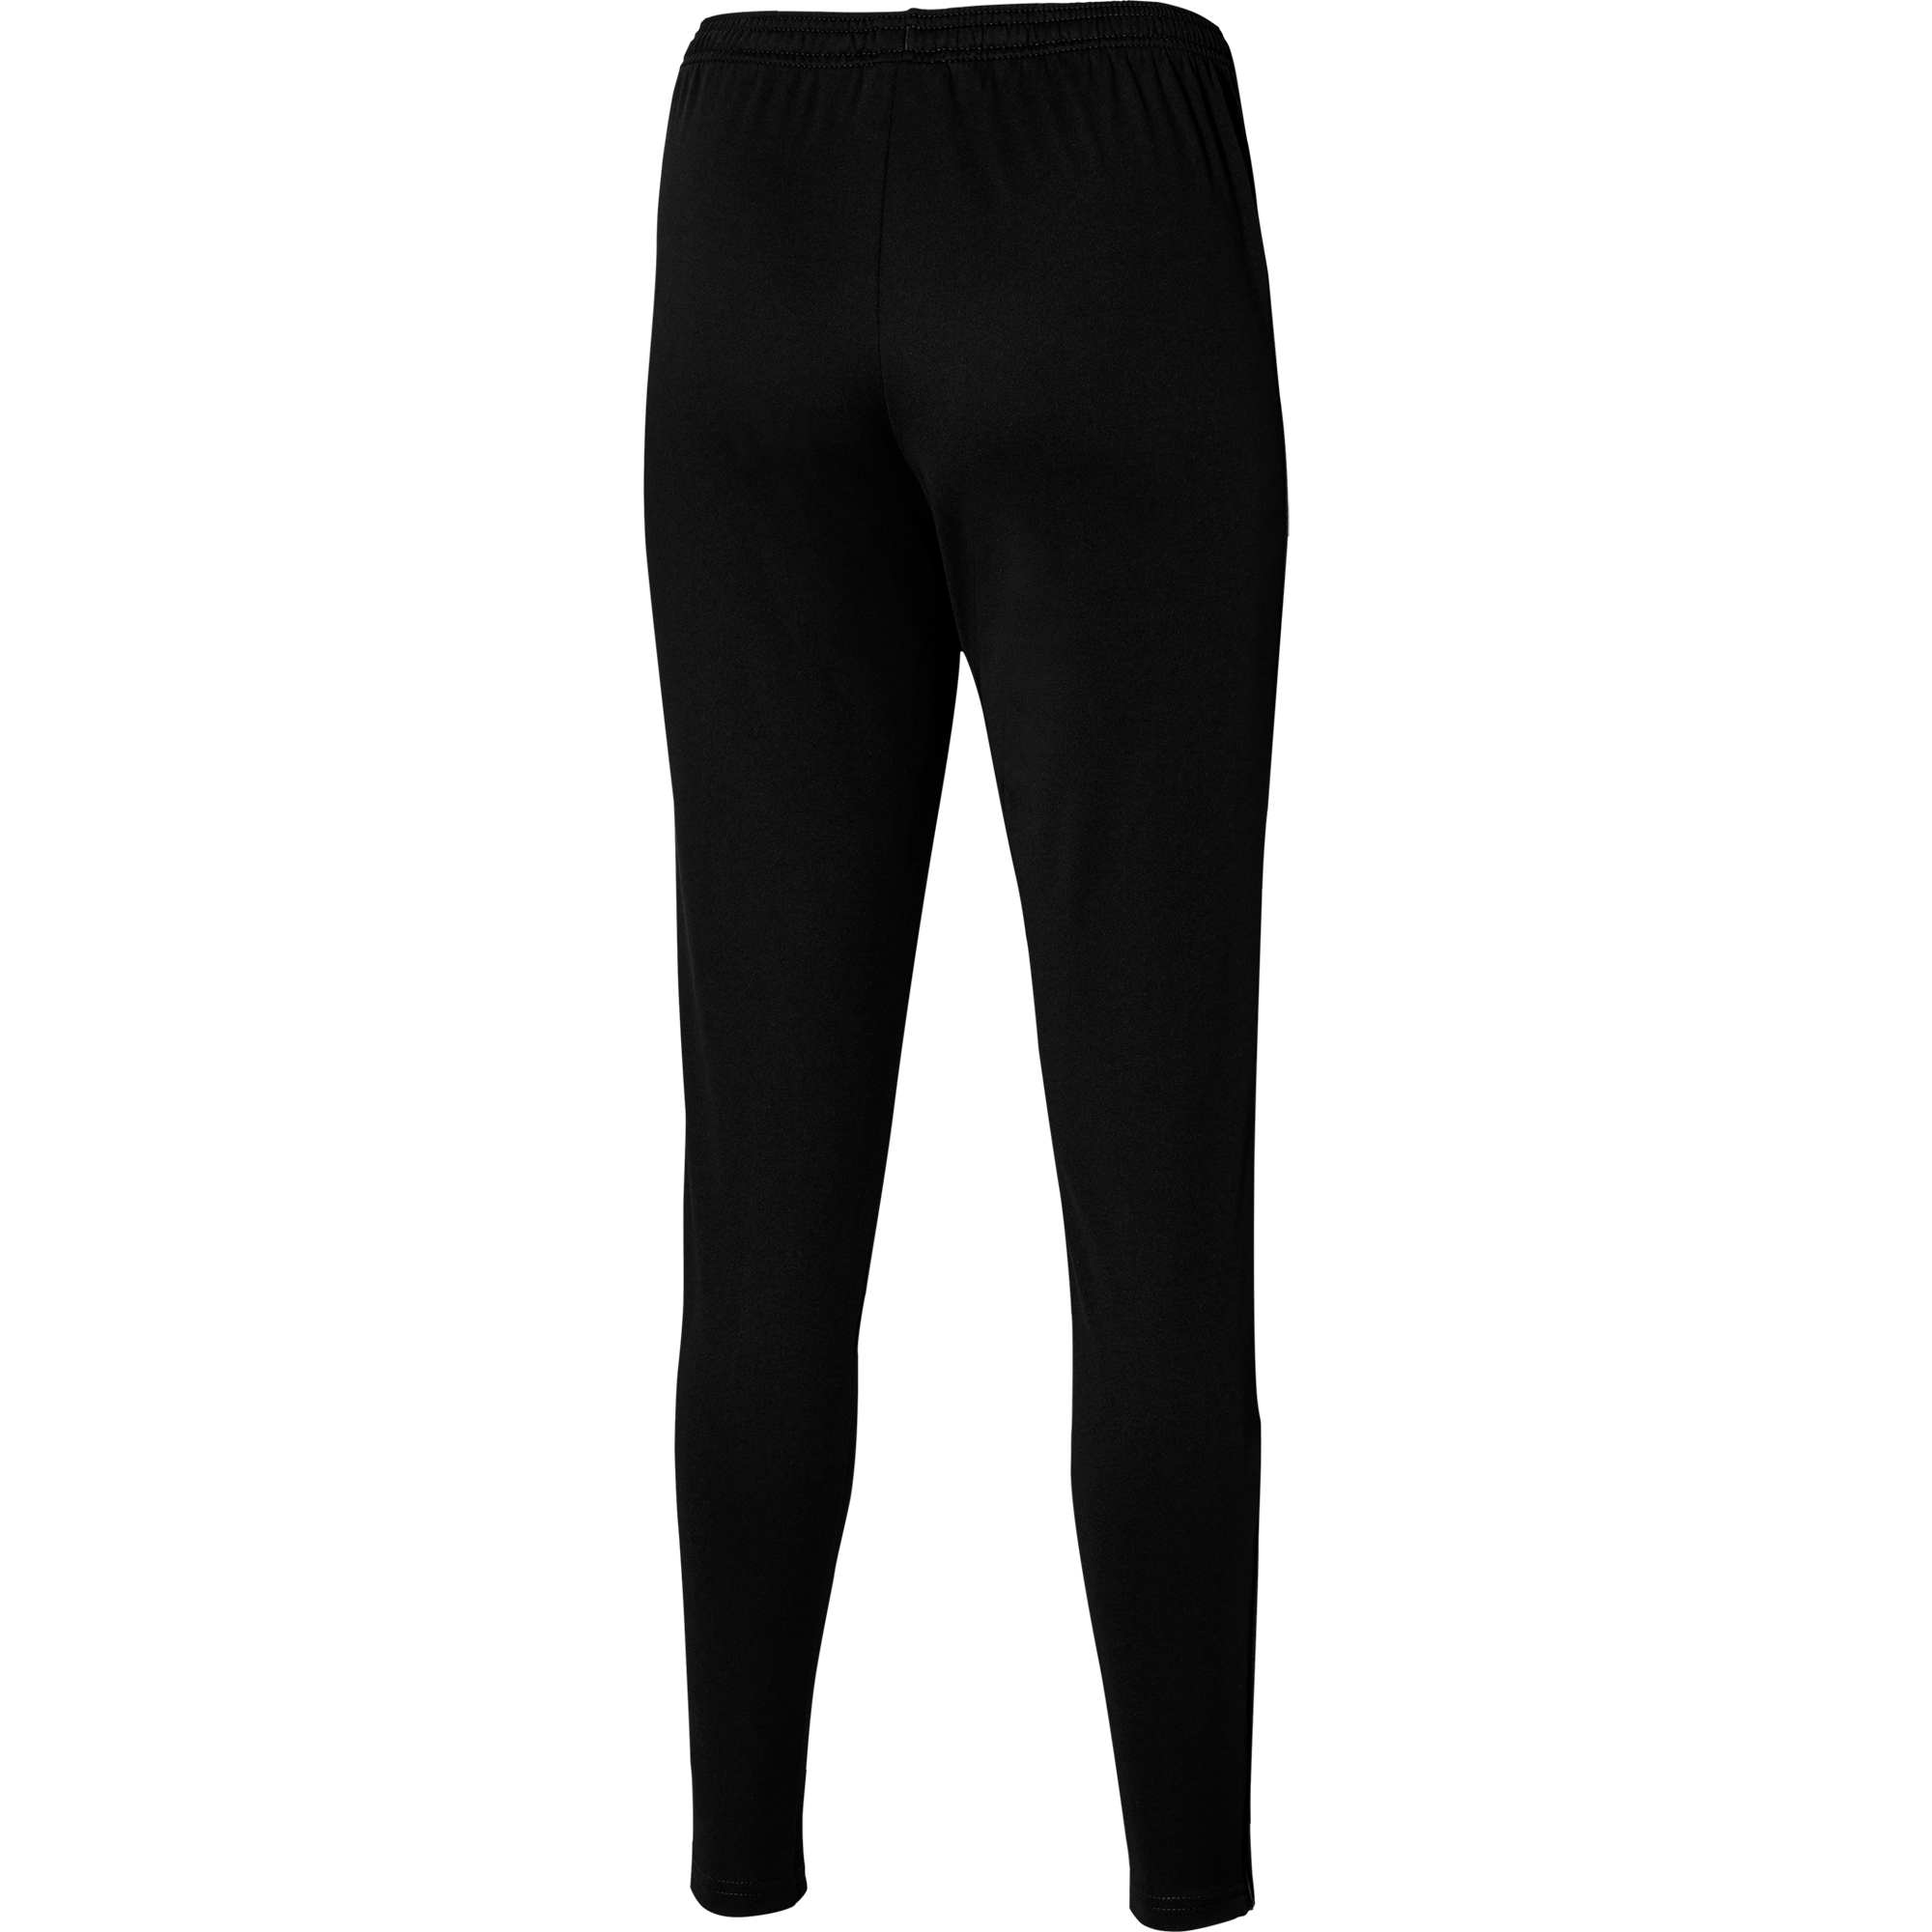 Clifton All Whites - Women's Academy 23 Knit Pant